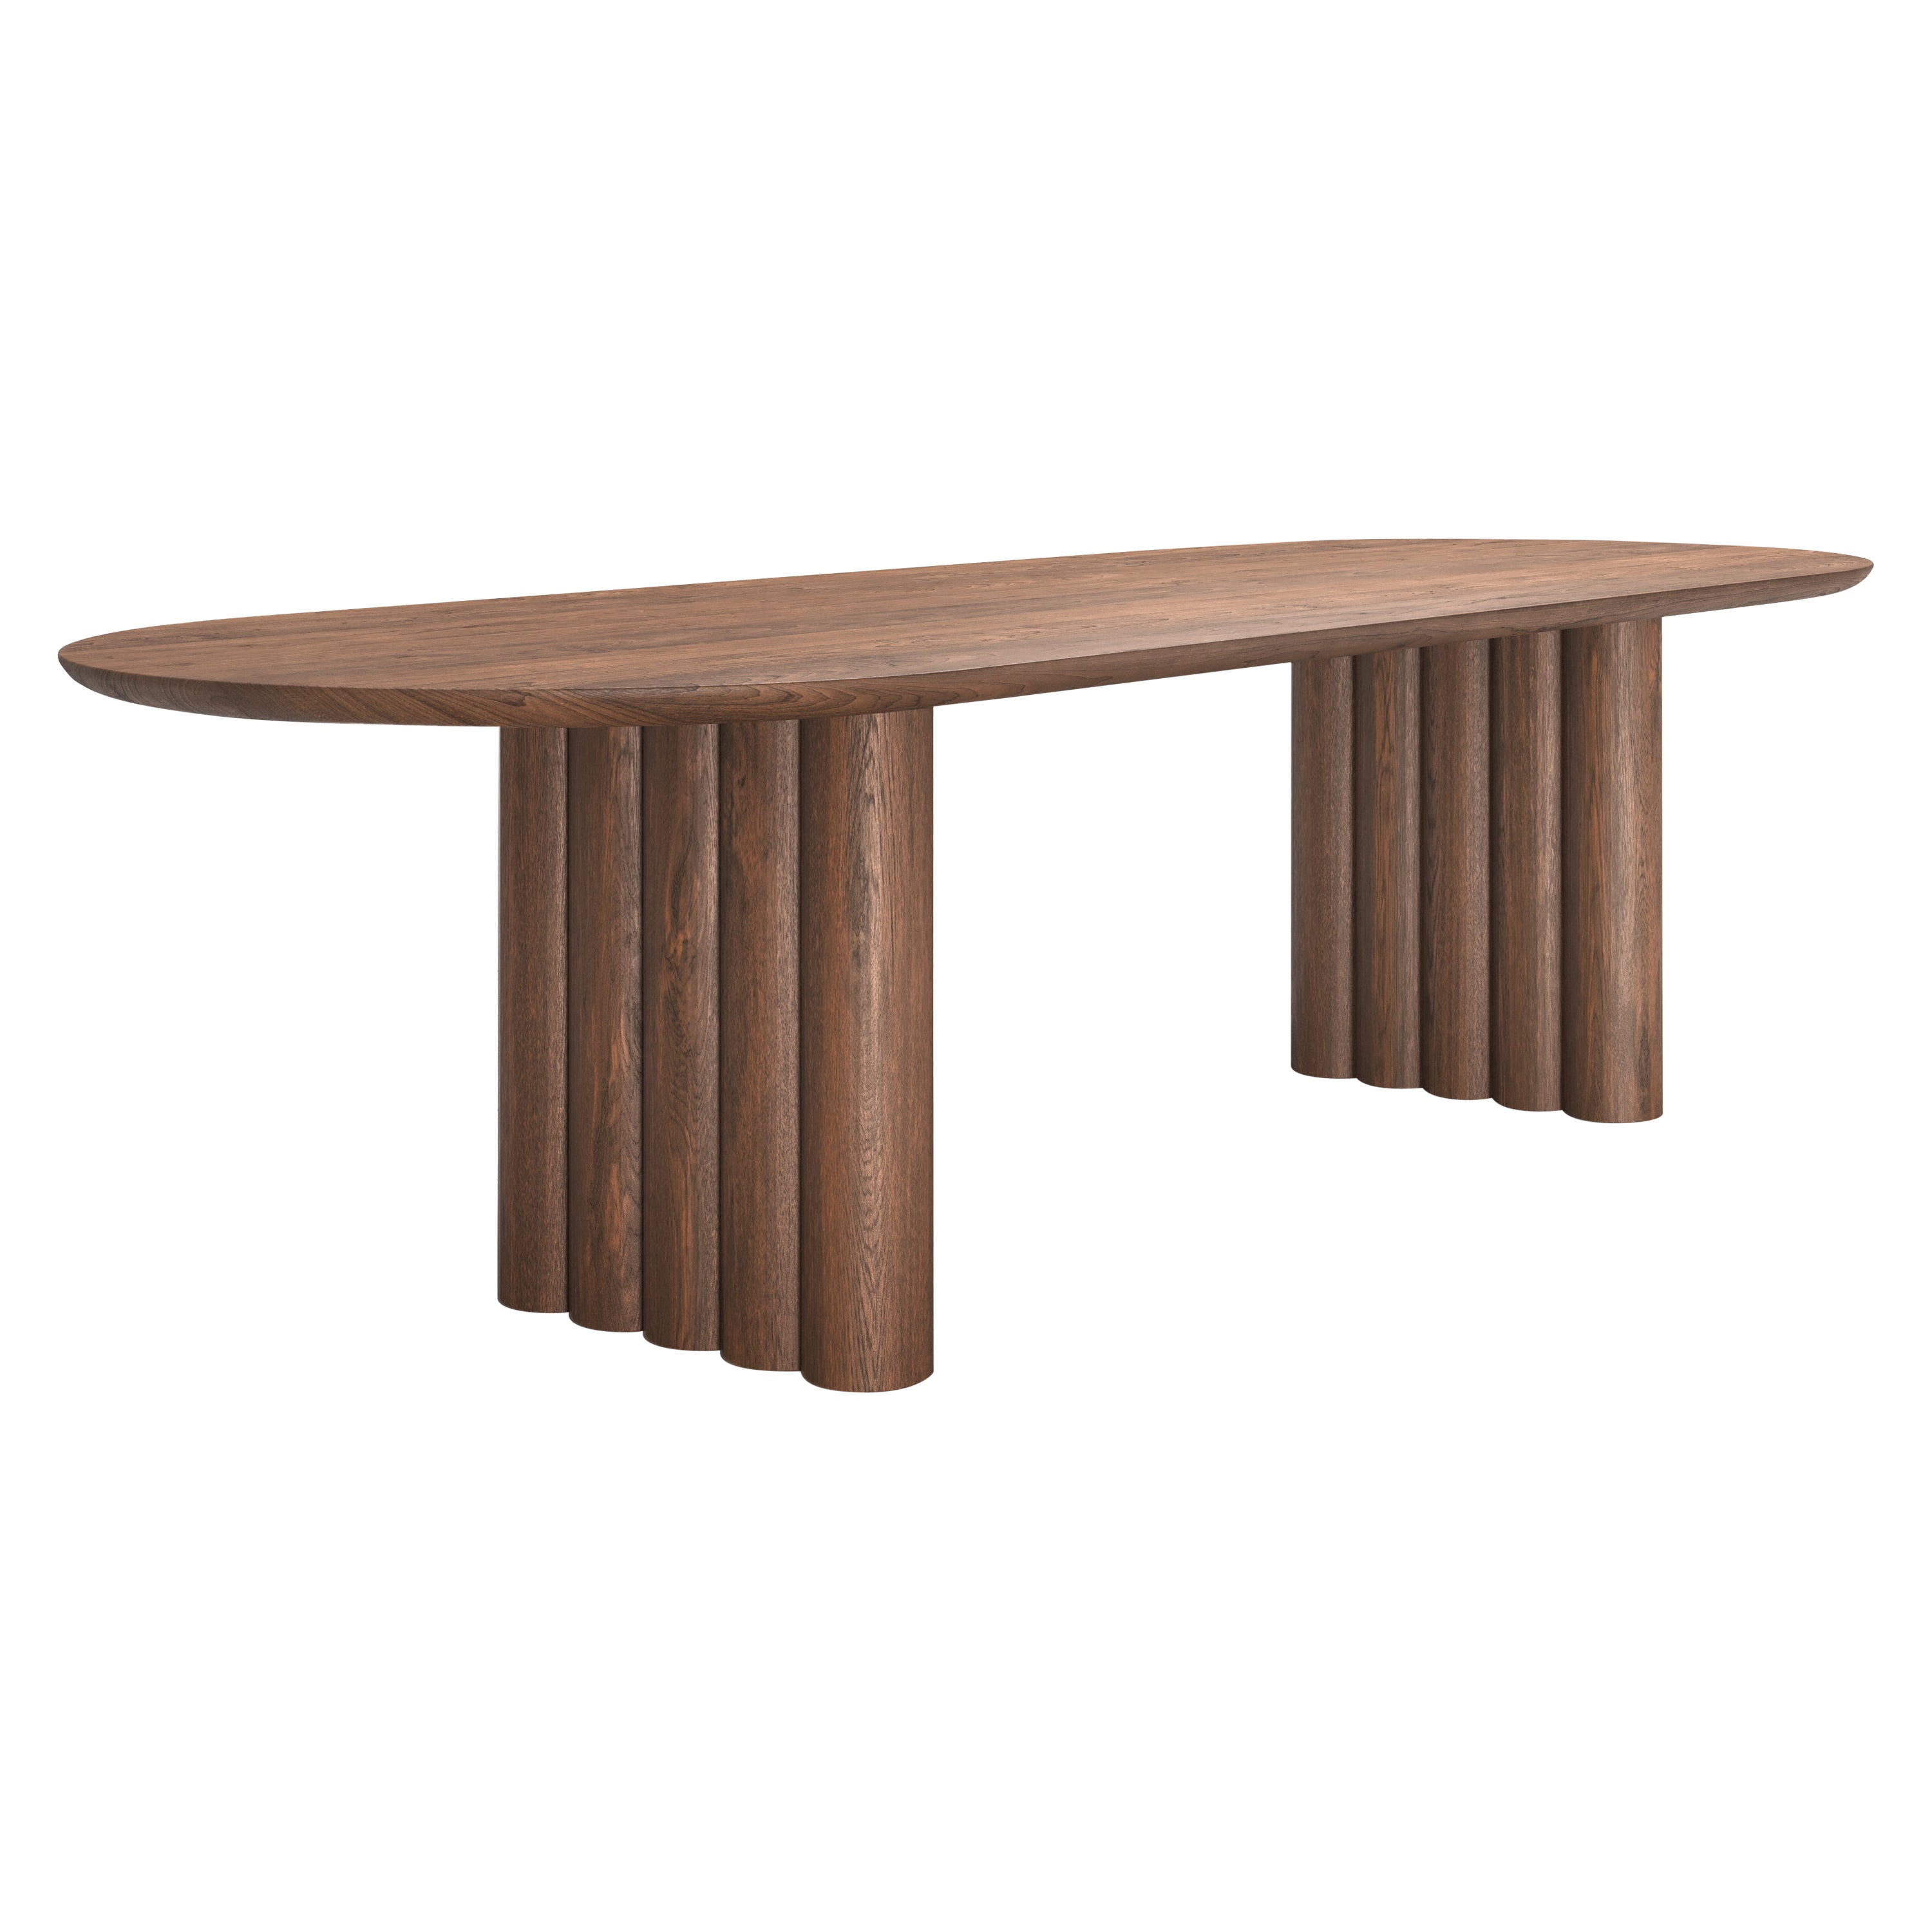 Contemporary Dining Table 'Plush' by Dk3, Smoked Oak or Walnut, 200 For Sale